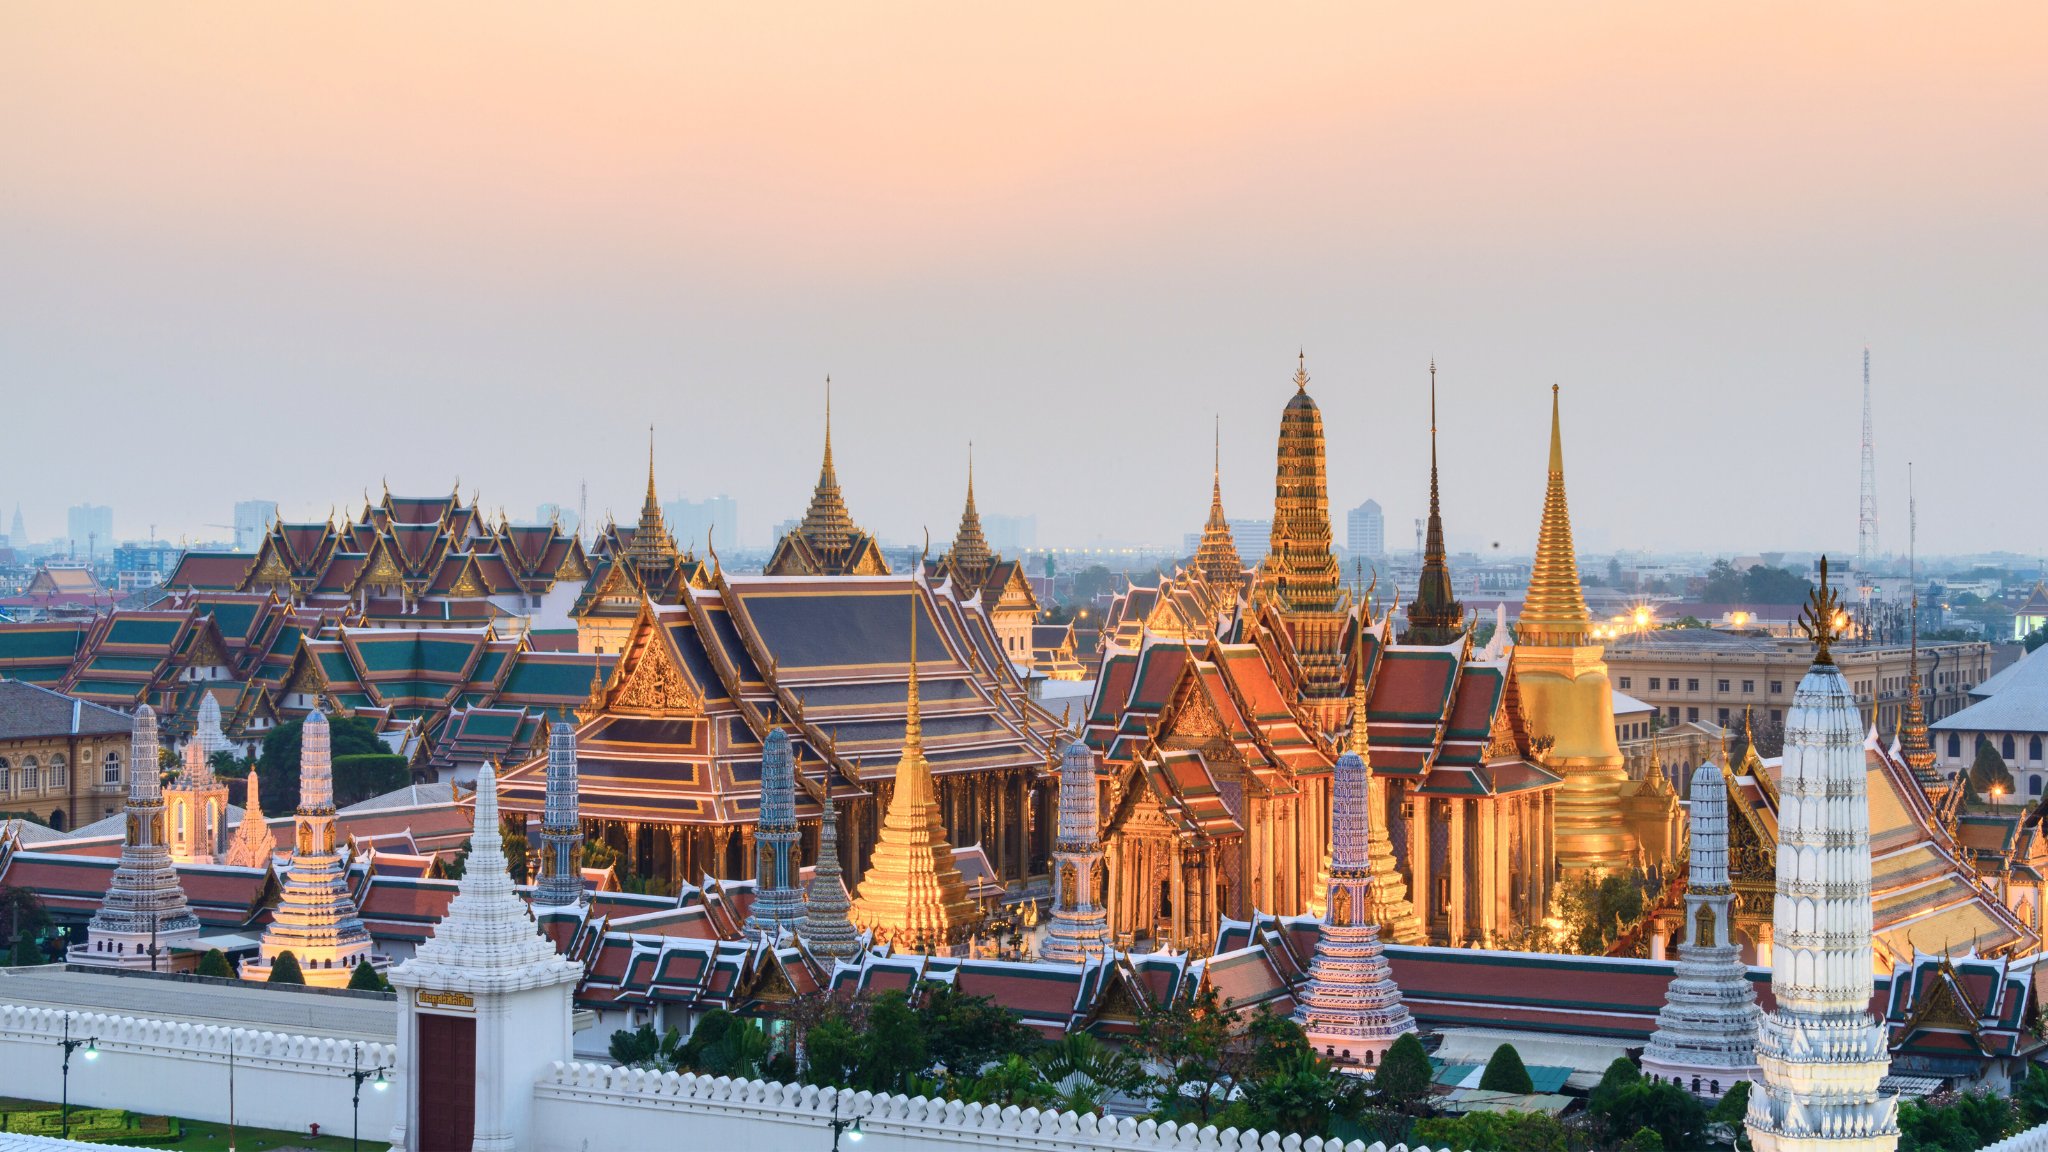 Day 2 Explore Bangkok's Famous Spots In A City Tour